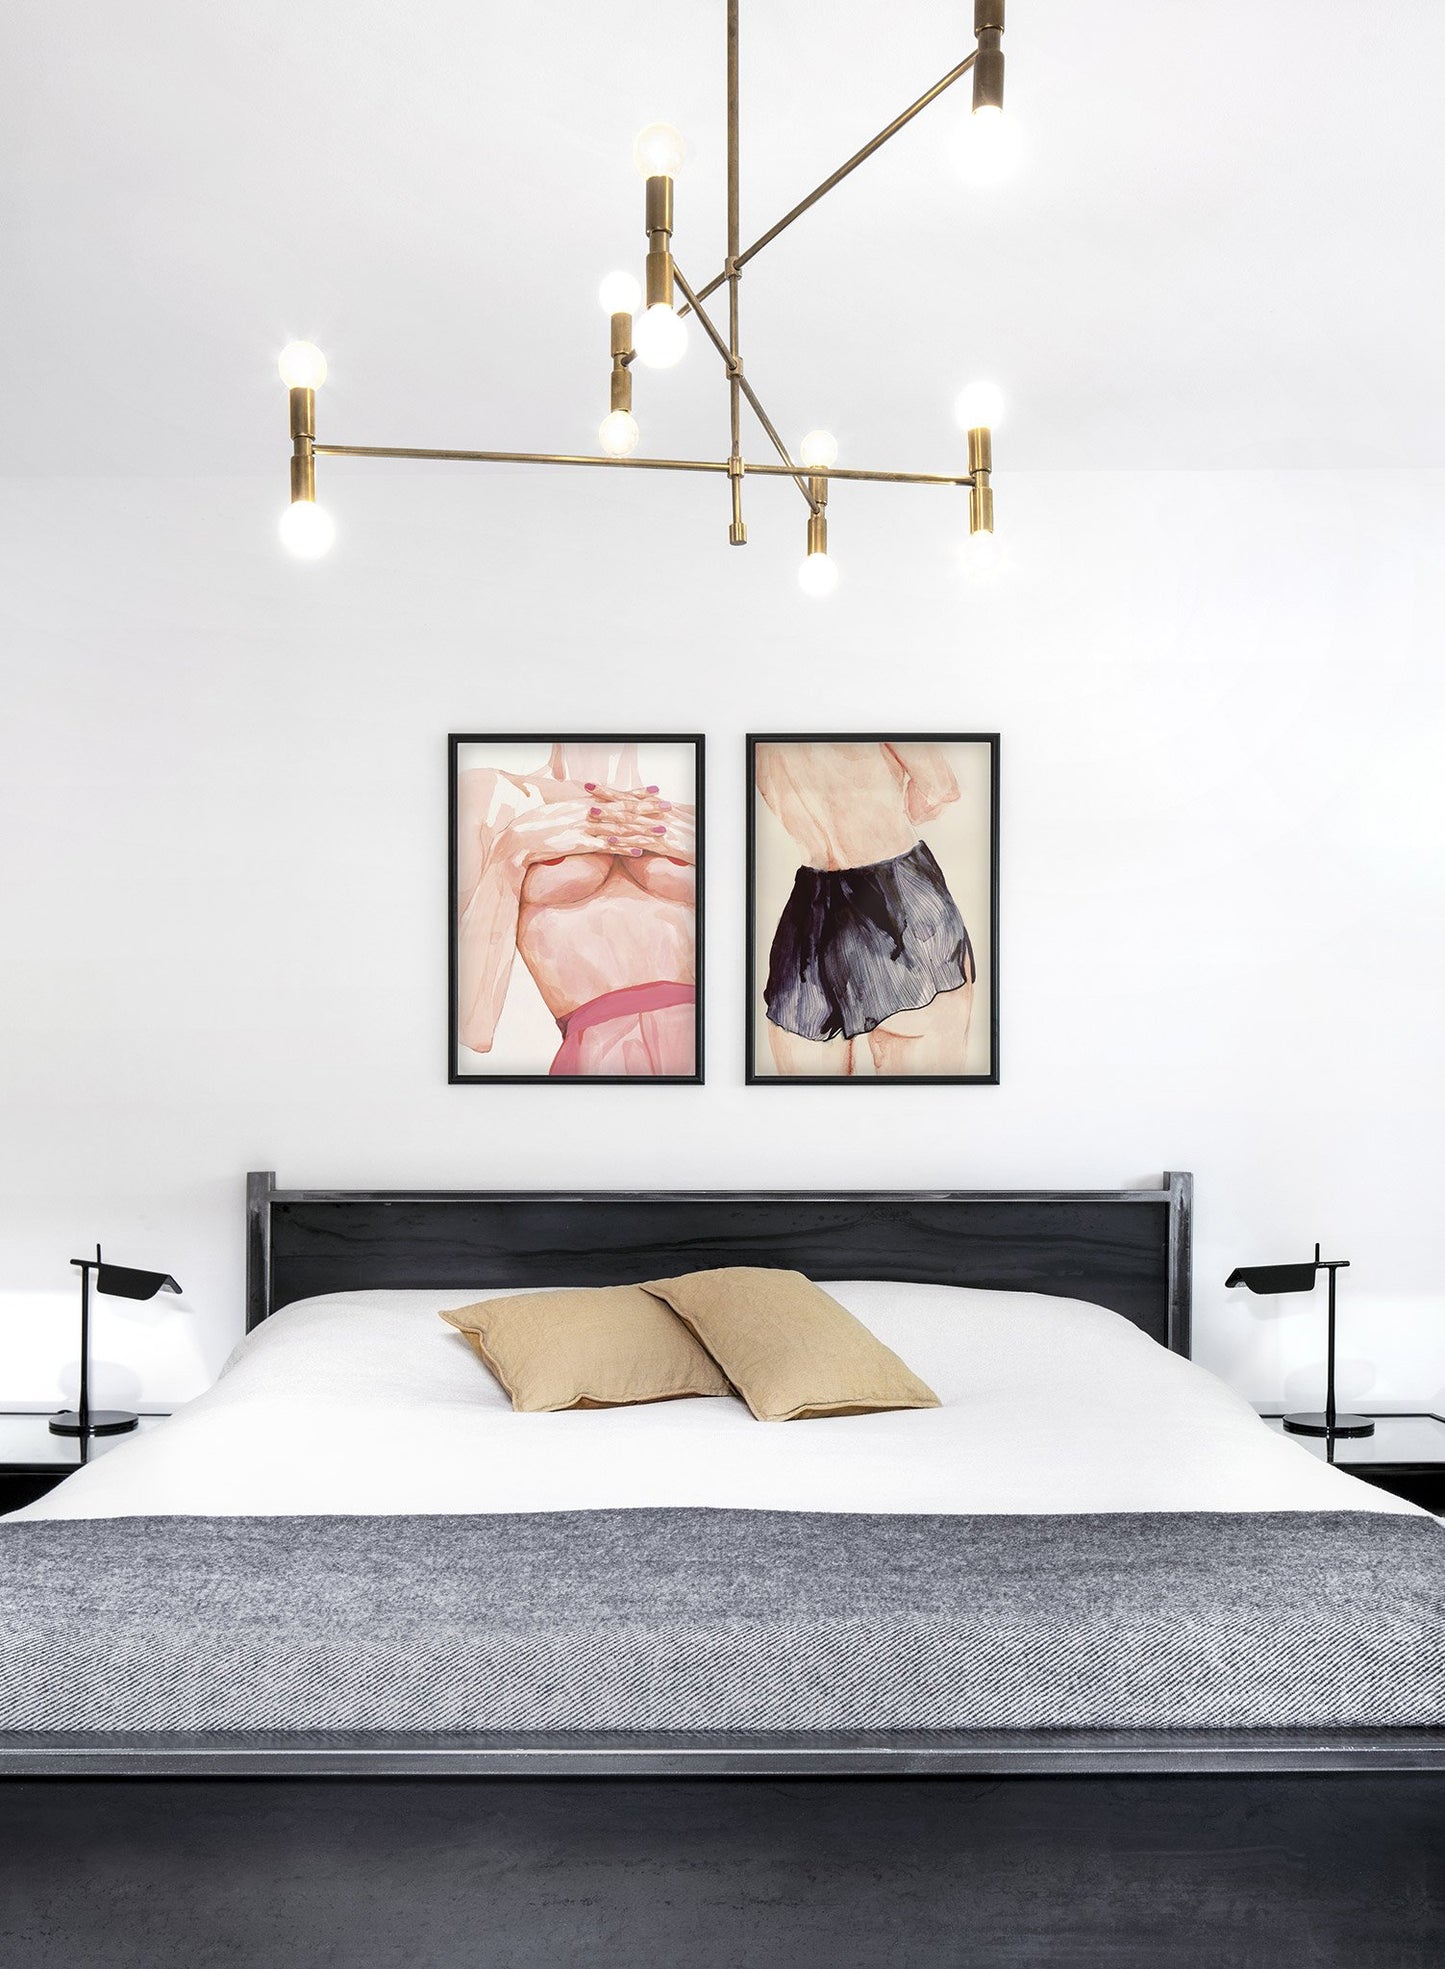 Fashion illustration poster by Opposite Wall with naked woman watercolour - Lifestyle Duo - Bedroom